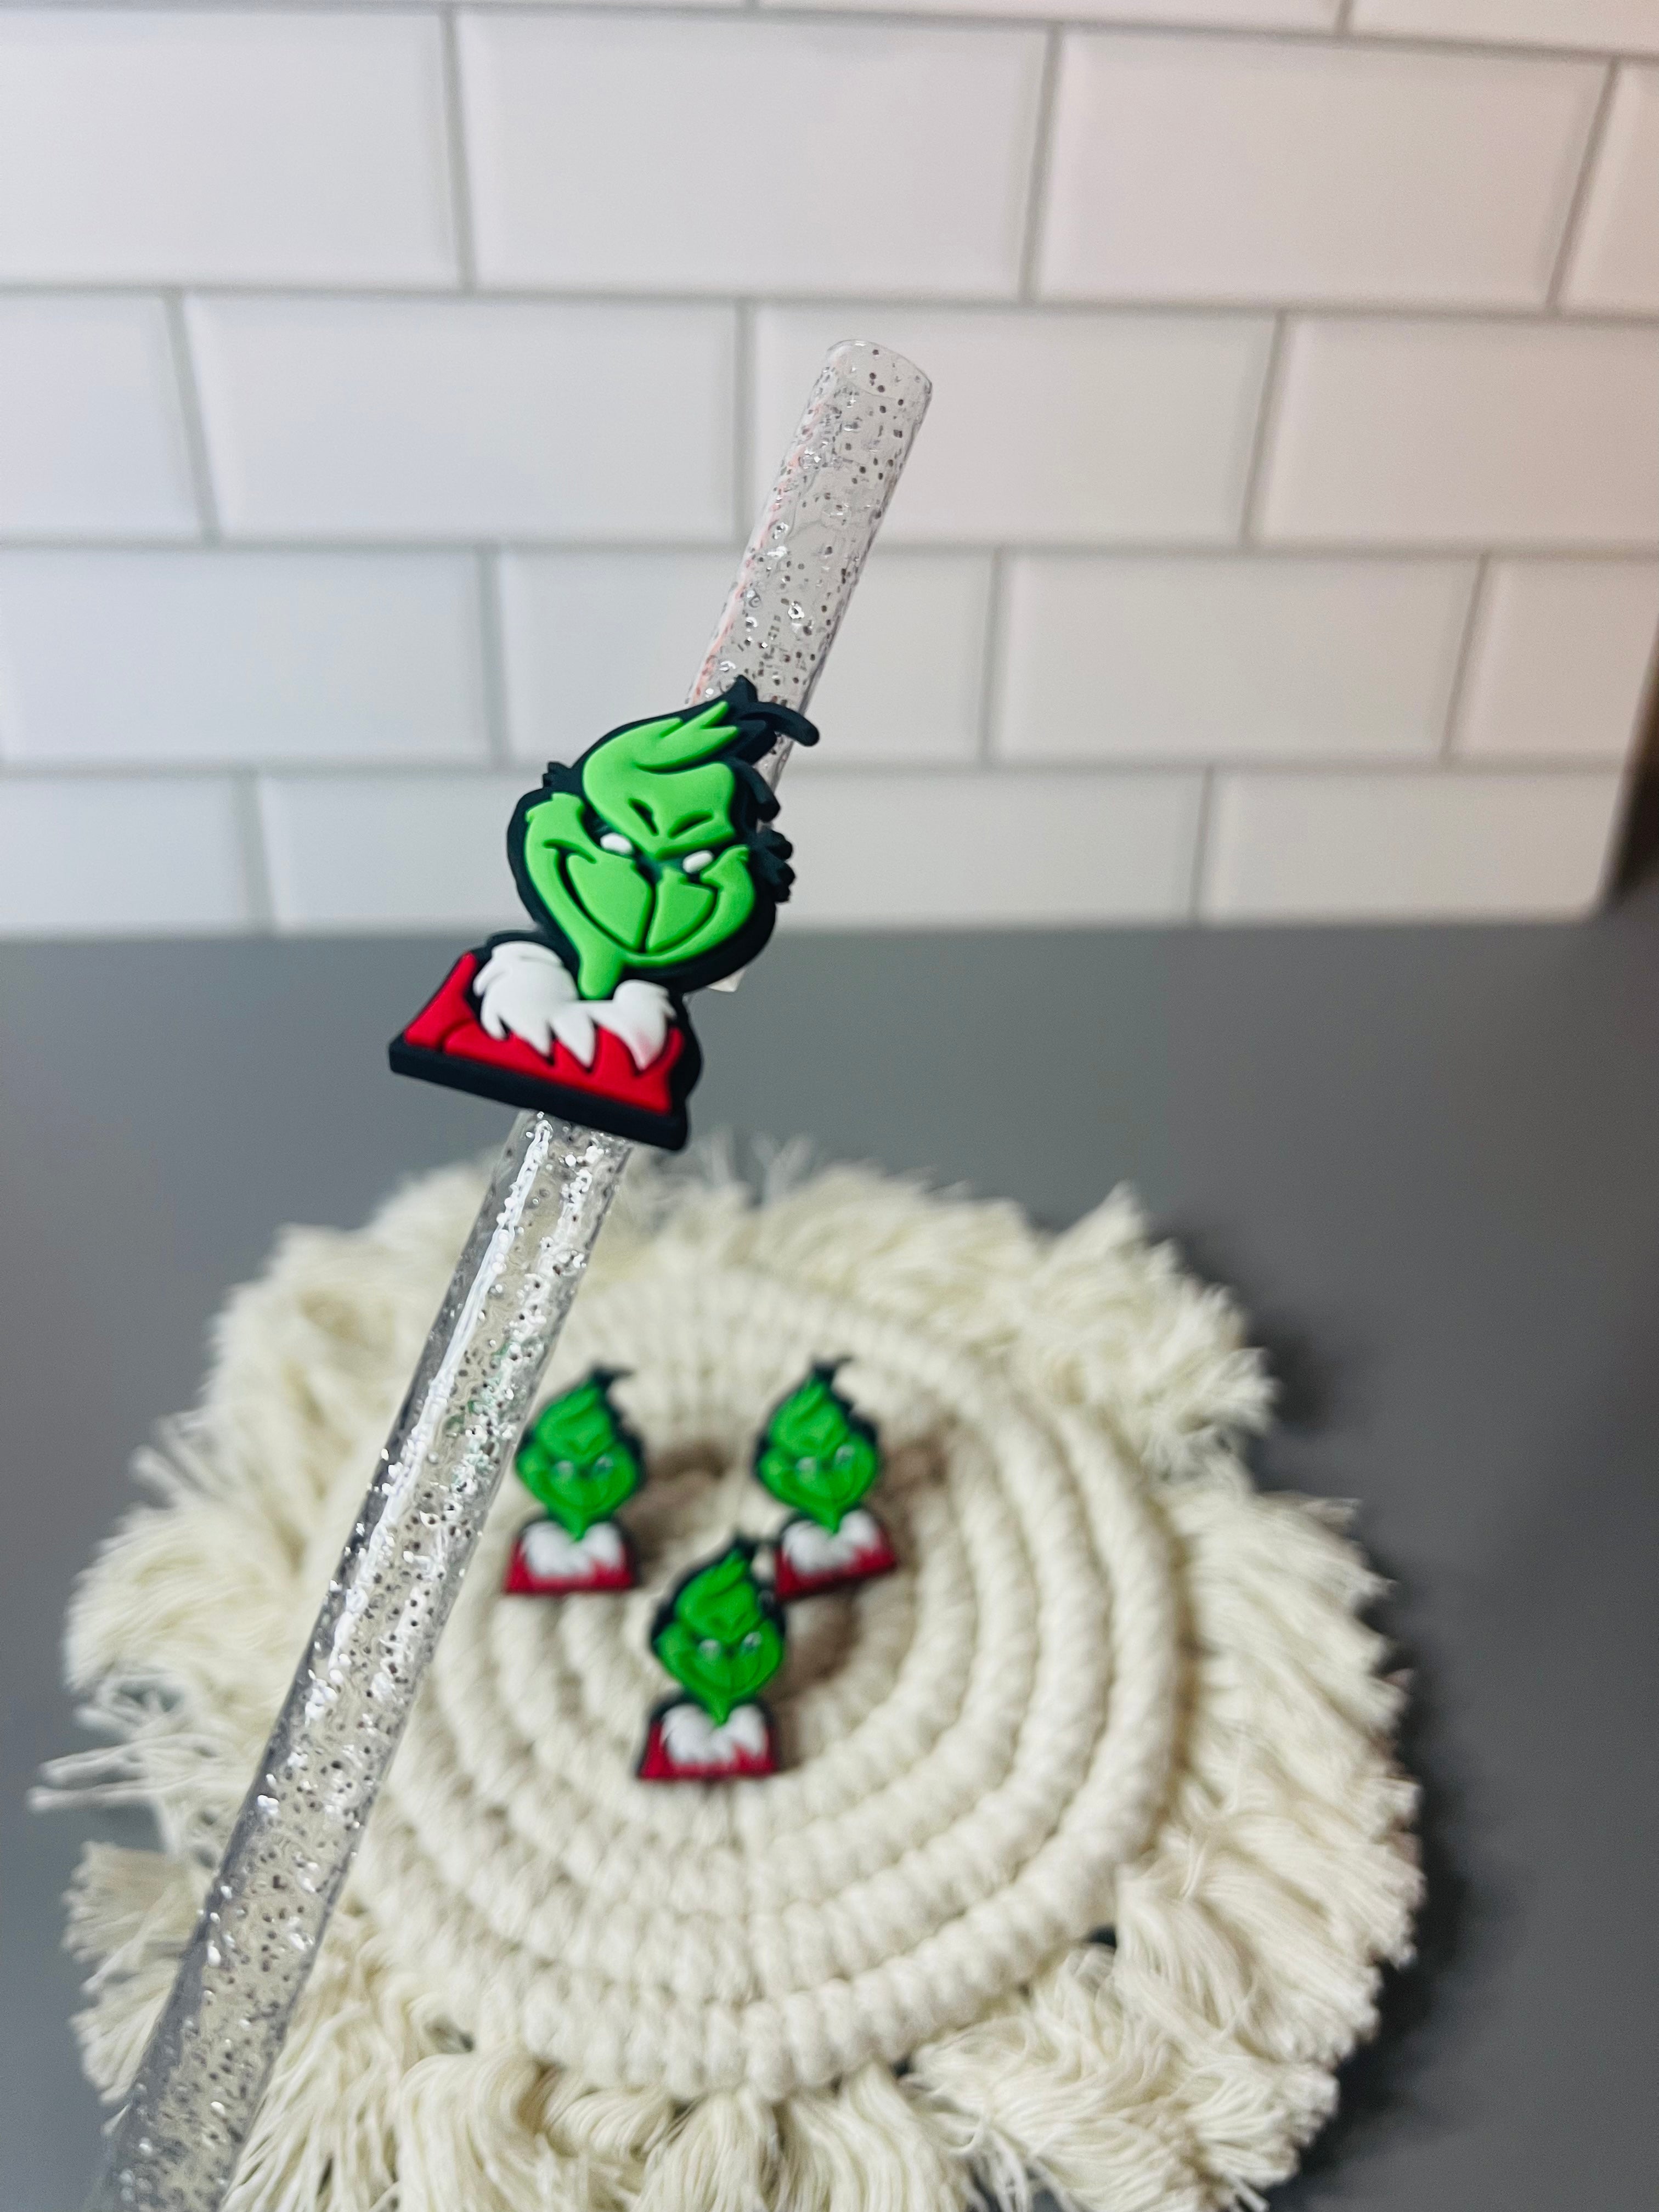 How the Grinch Stole Christmas Straw Topper – B&Z Designs LLC